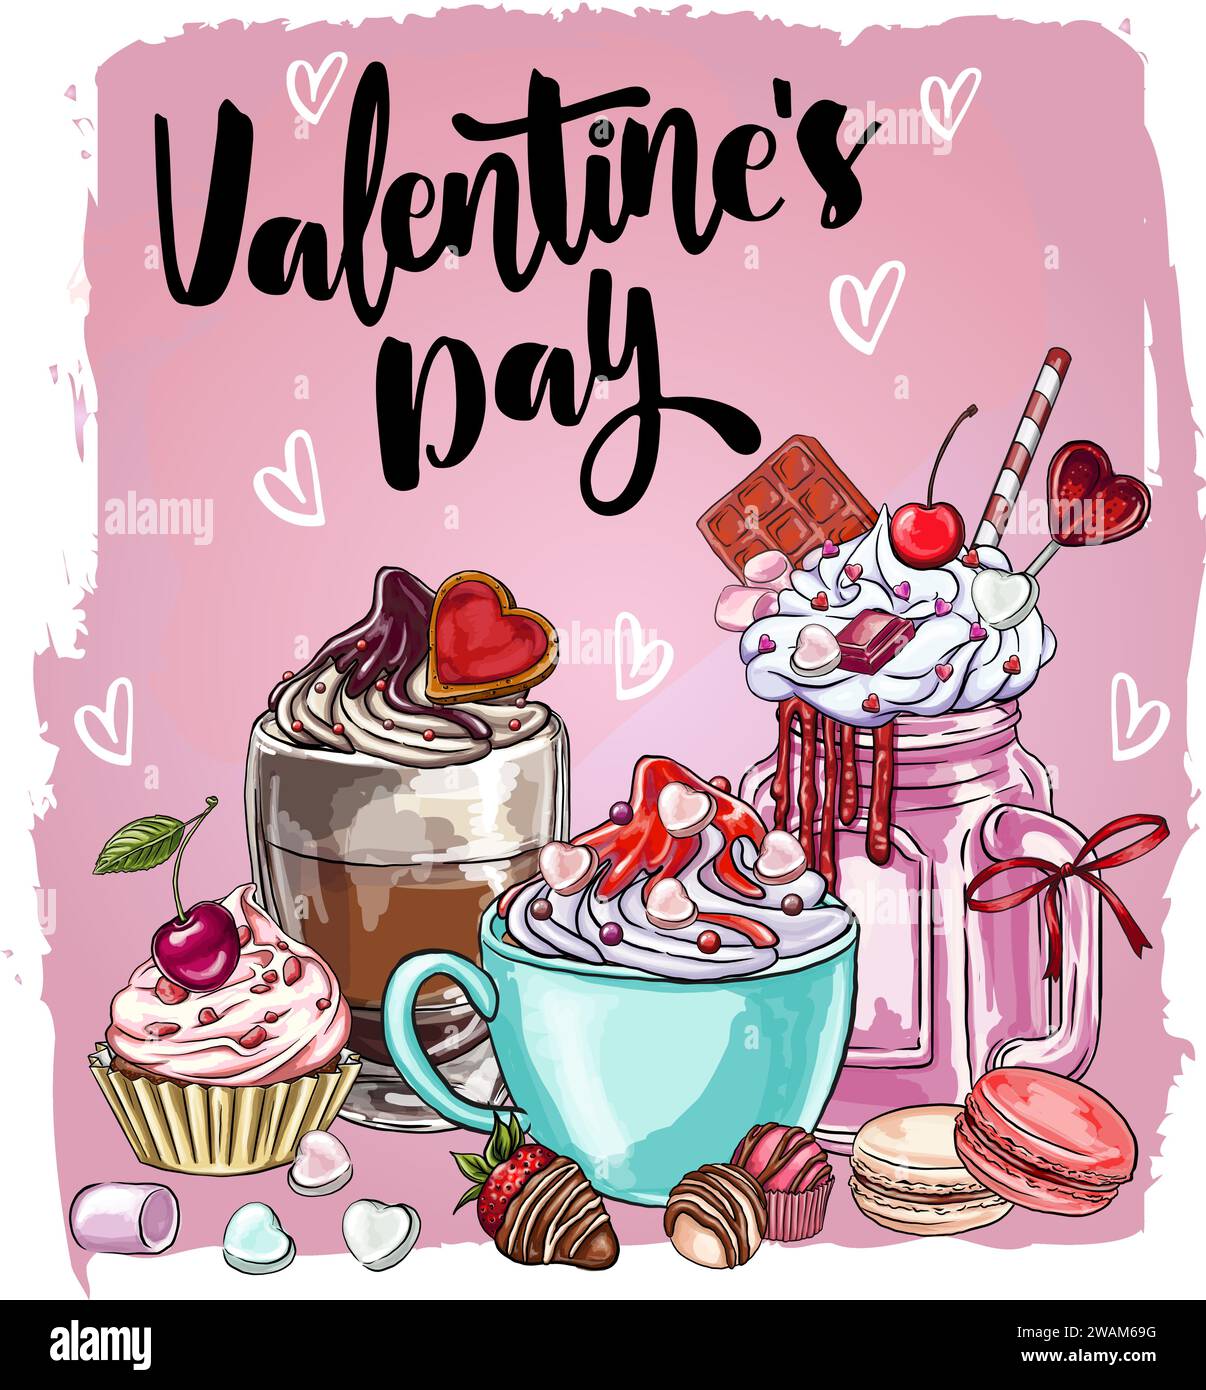 Illustration set for Valentine's Day themed designs, coffee cookies, chocolates, candies, DIY, digital printing, t-shirt designs, stickers, bar signs Stock Vector